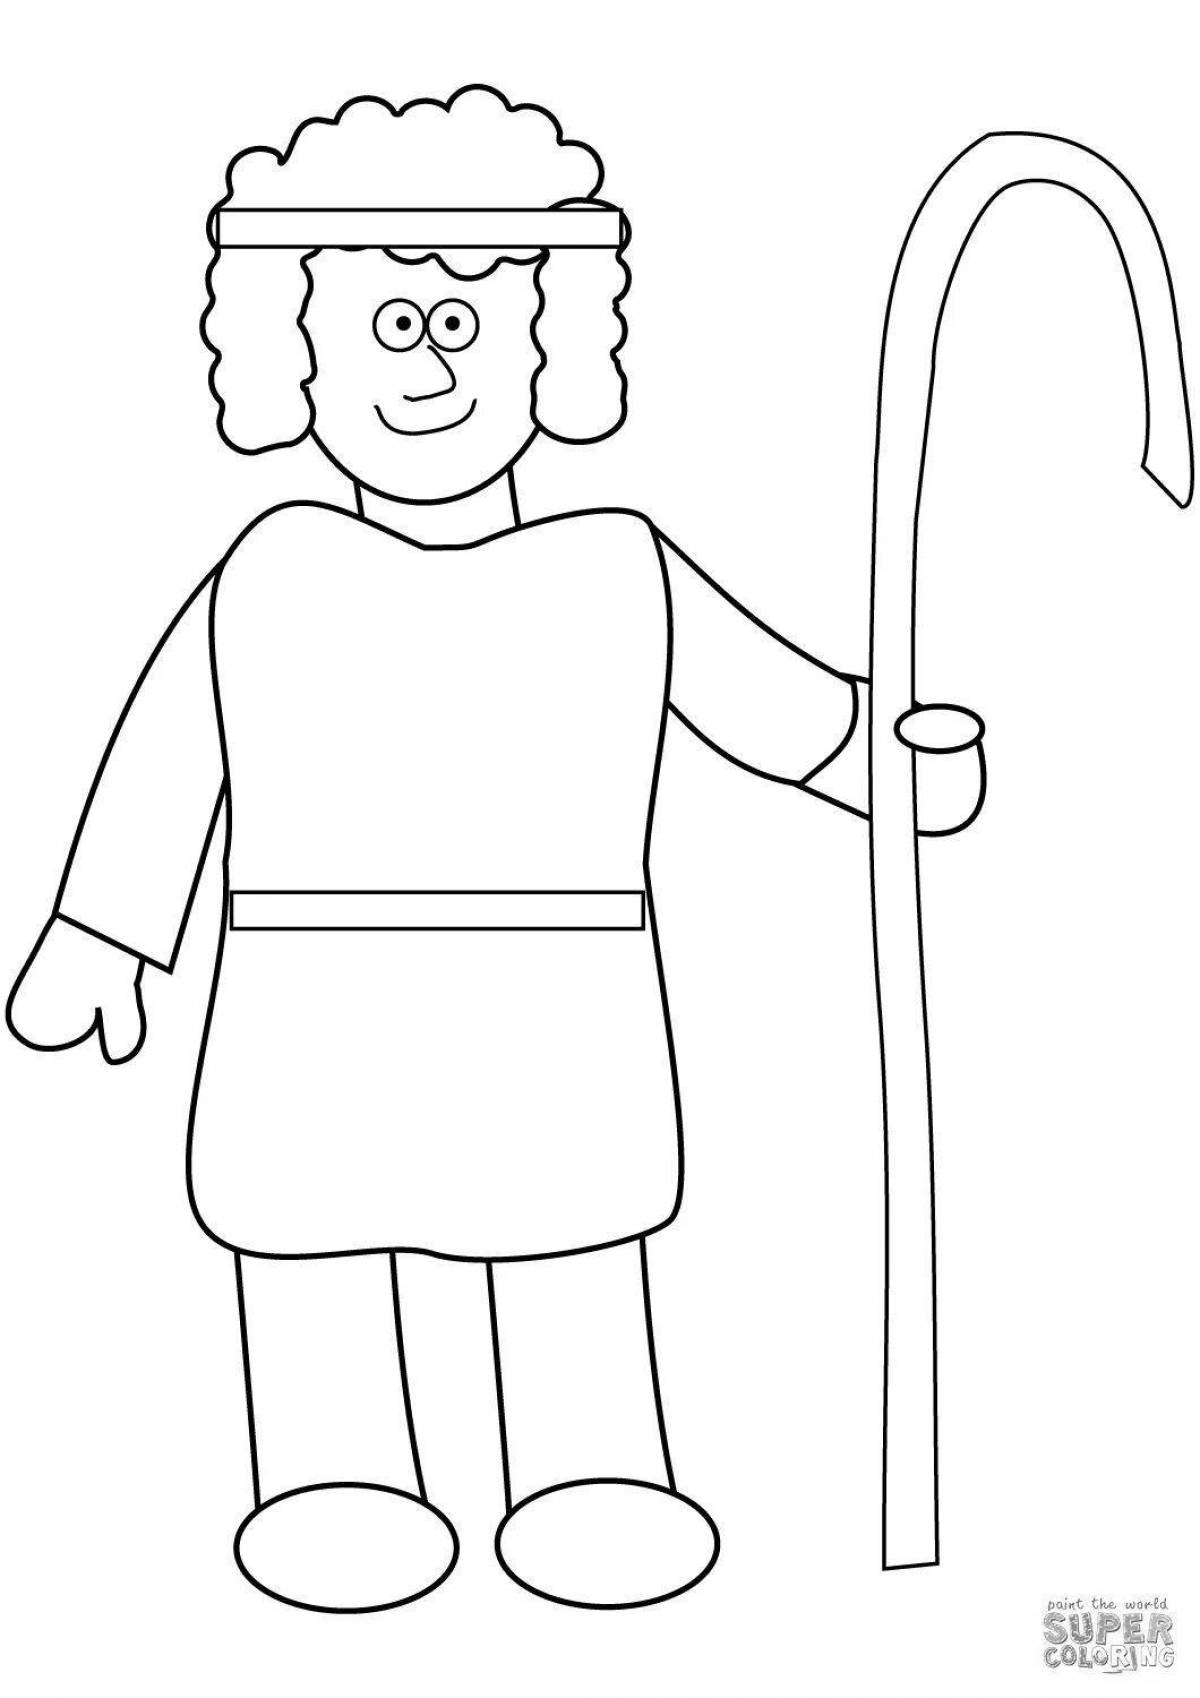 Animated Shepherd Coloring Page